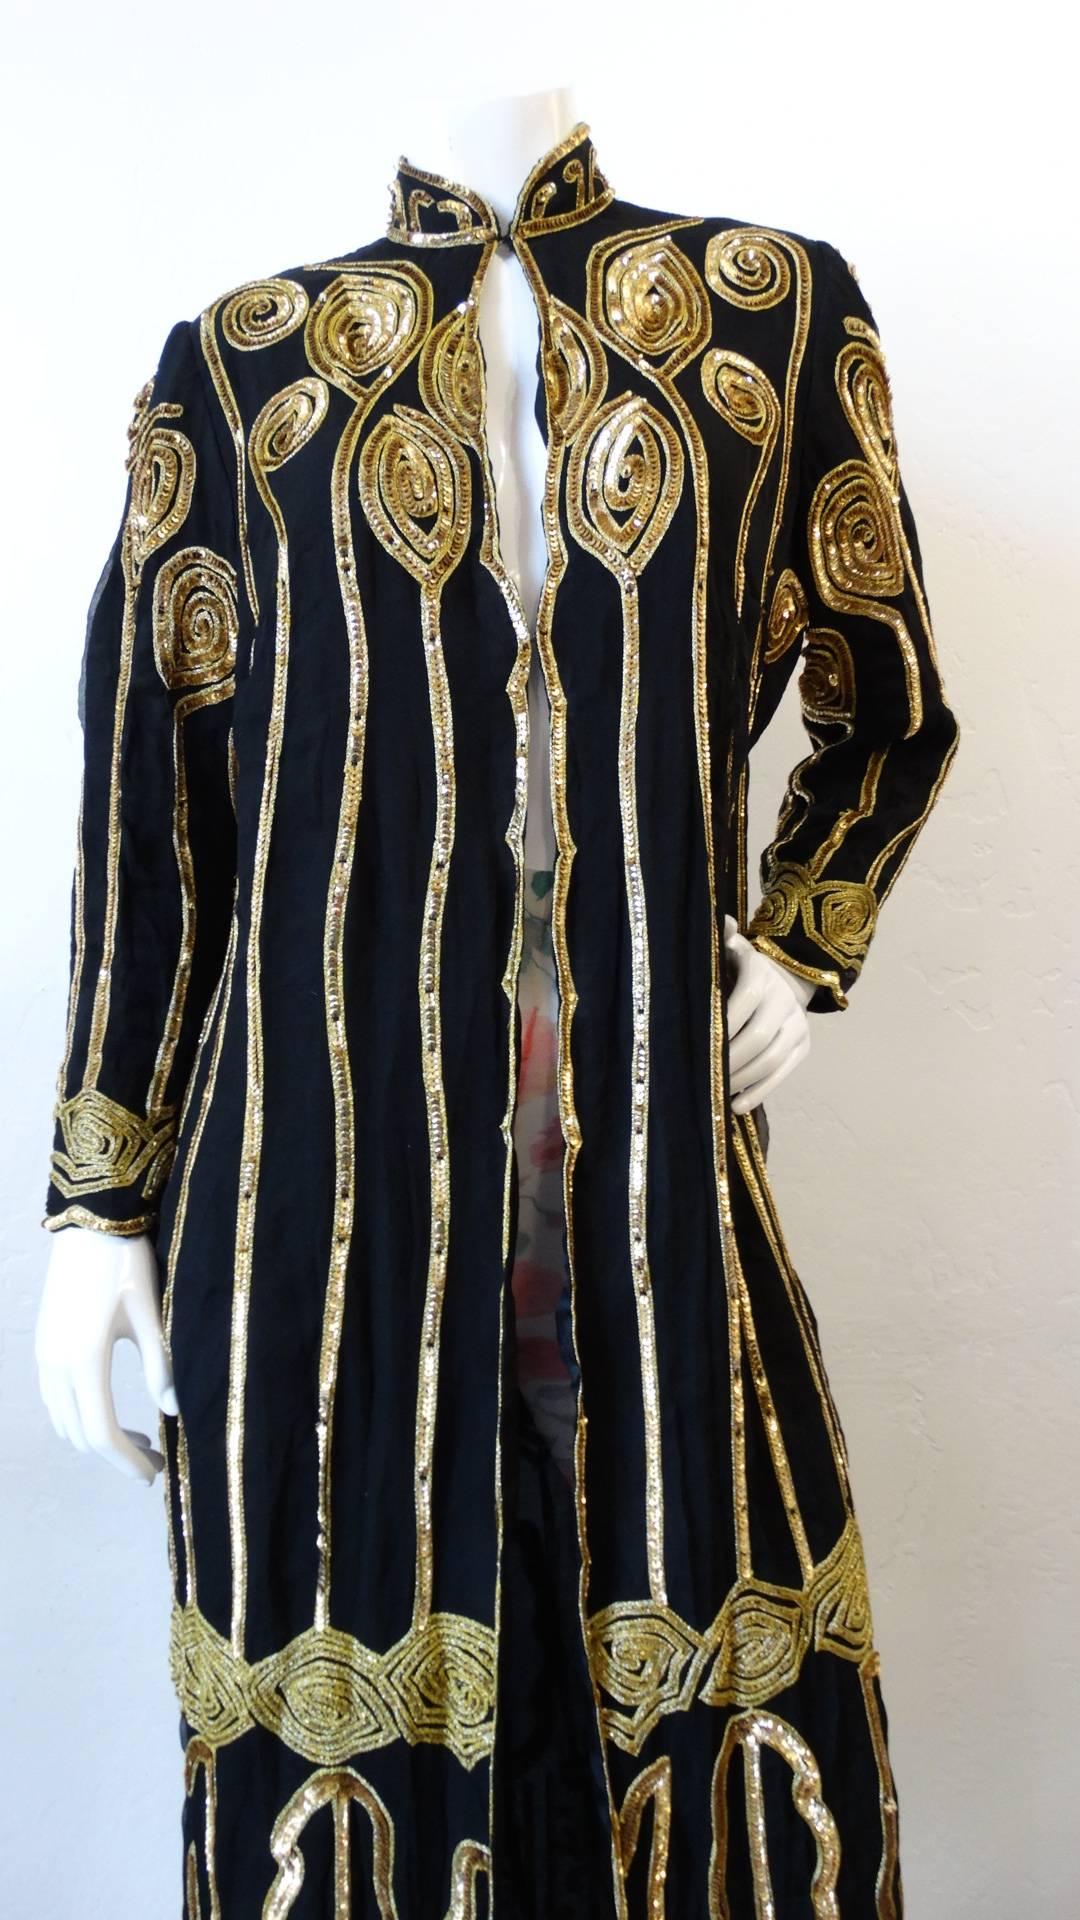 Glam up your evening wardrobe with our amazing 1980s black & gold embellished duster jacket! Constructed from solid black fabric and embellished all over in gold cord, embroidery and sequins. Long vertical stripes of sequins sewn down the front of